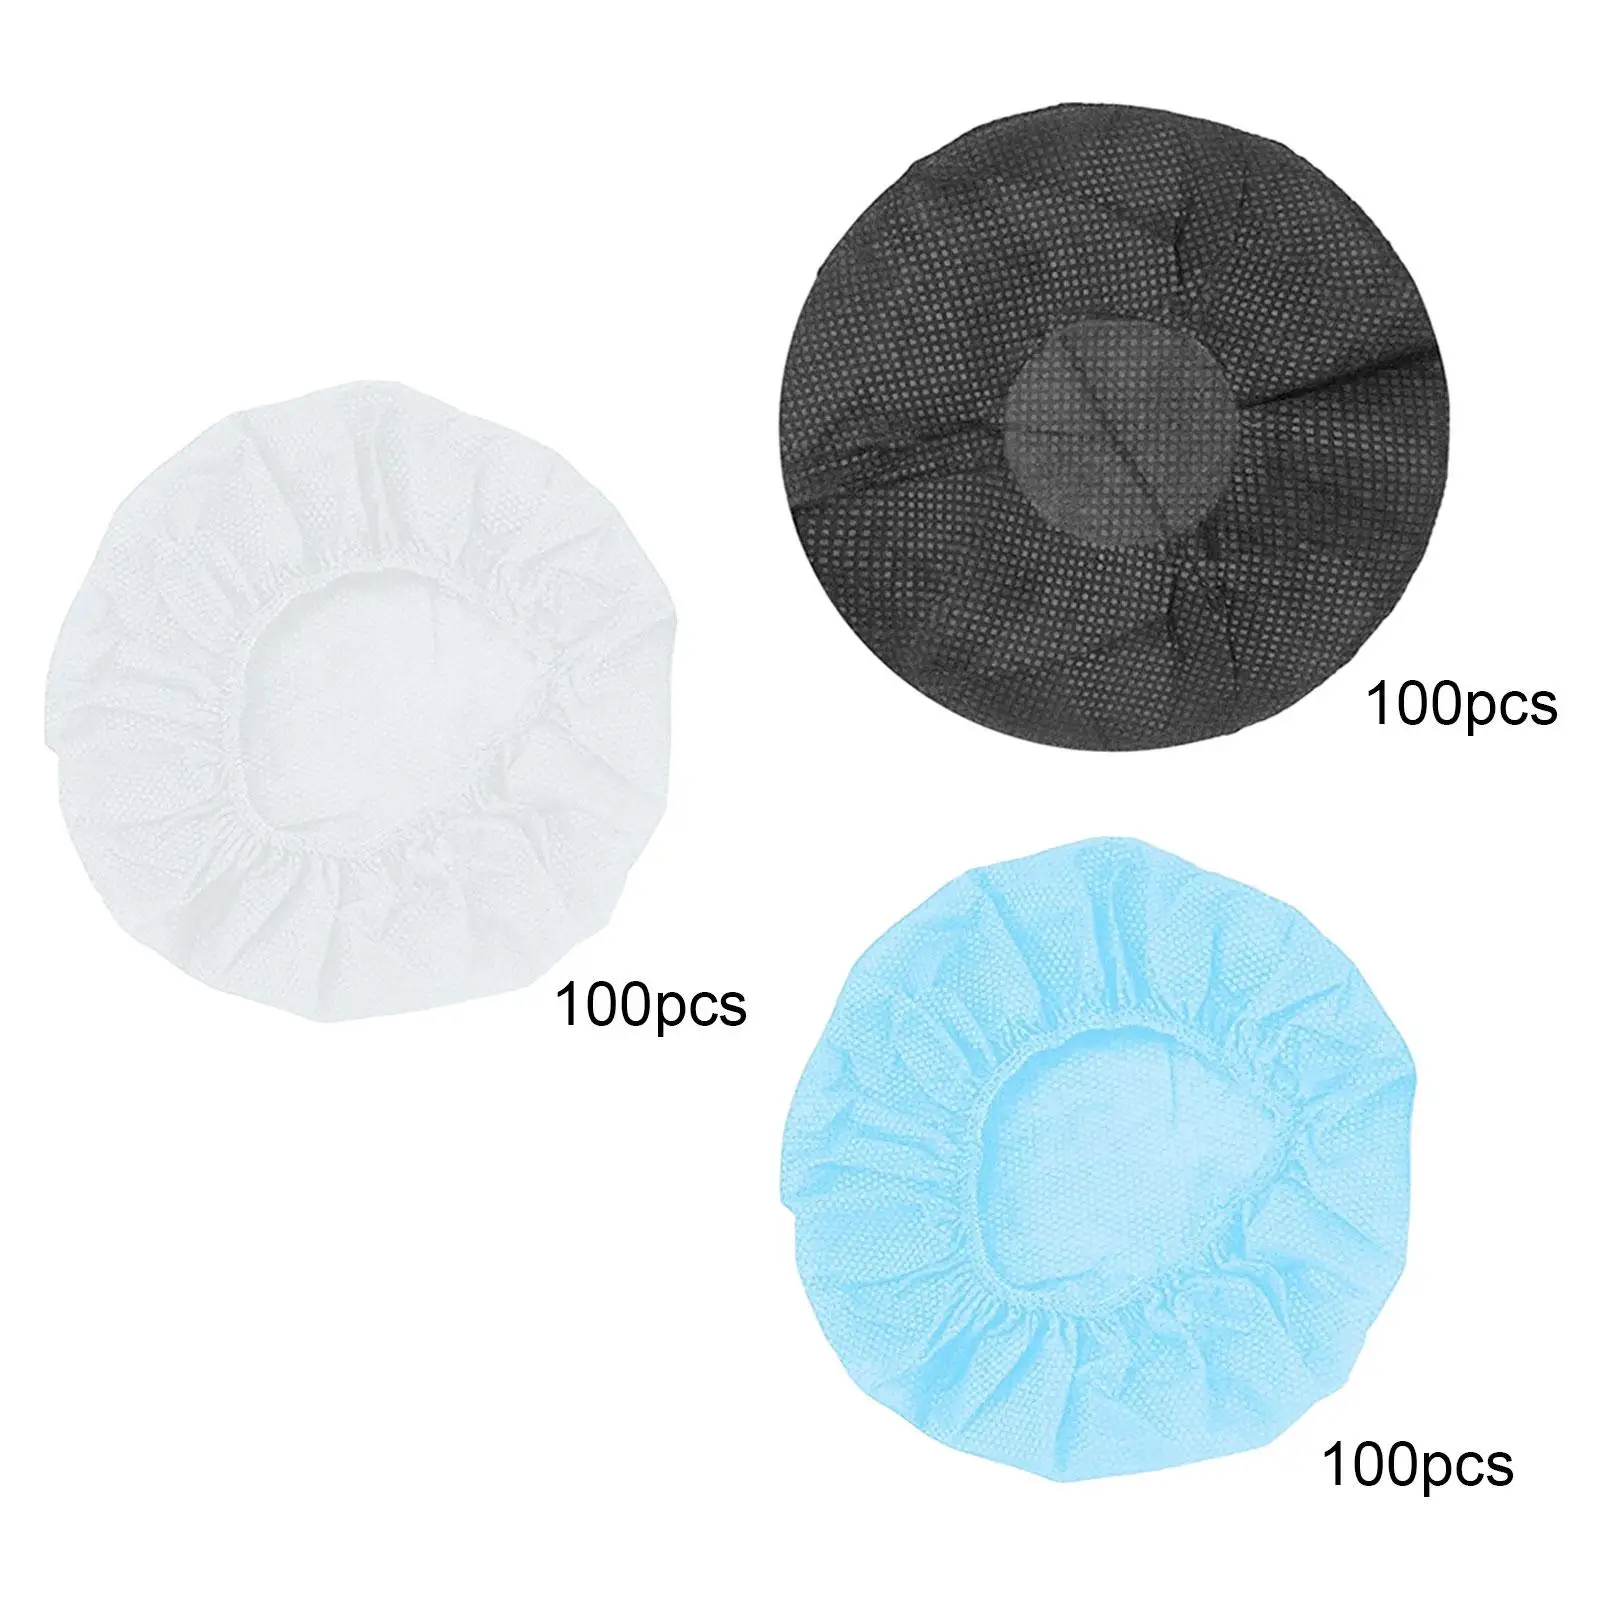 Disposable Headphone Covers Earpad Covers Earphone Covers 100 Piece for Most on Ear Headphones 8.5~10cm Earpads Call Centers